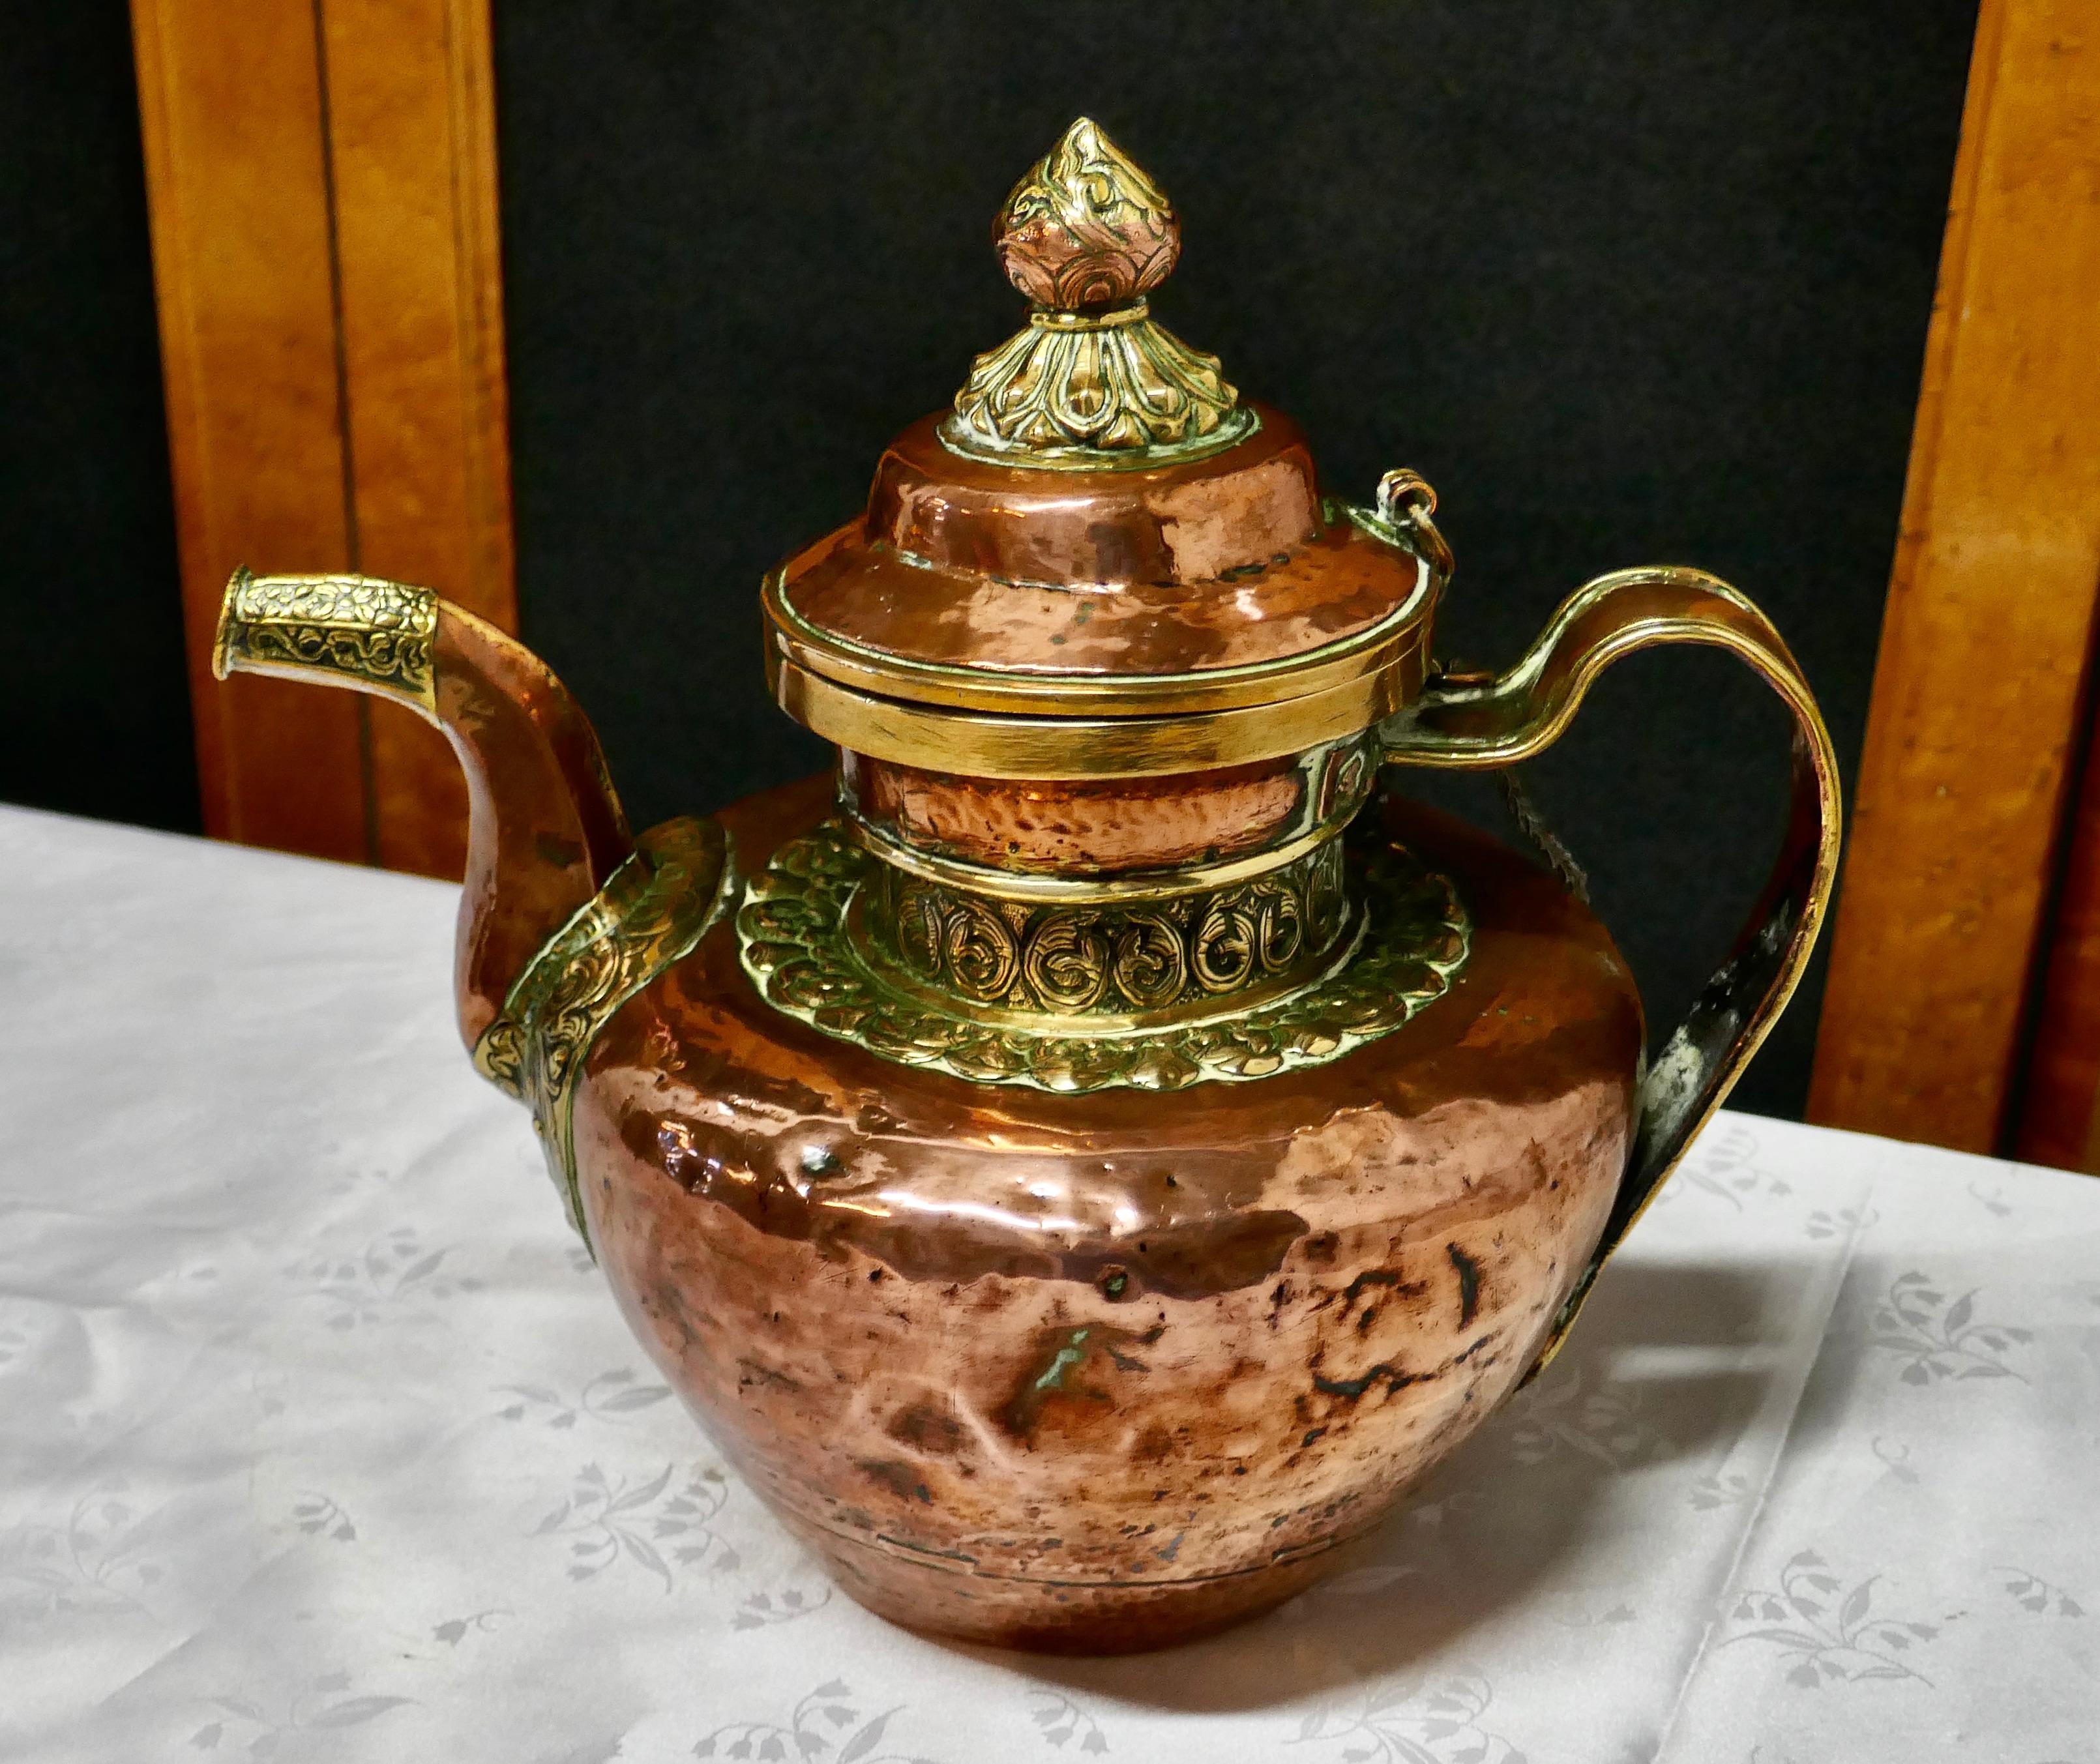 Charming 19th century Indian beaten copper and chased brass tea pot

A delightful piece, handmade in the Indian way, the copper is hand beaten and the brass is finely chased around the spout and lid, there is a chain attached to both the lid and